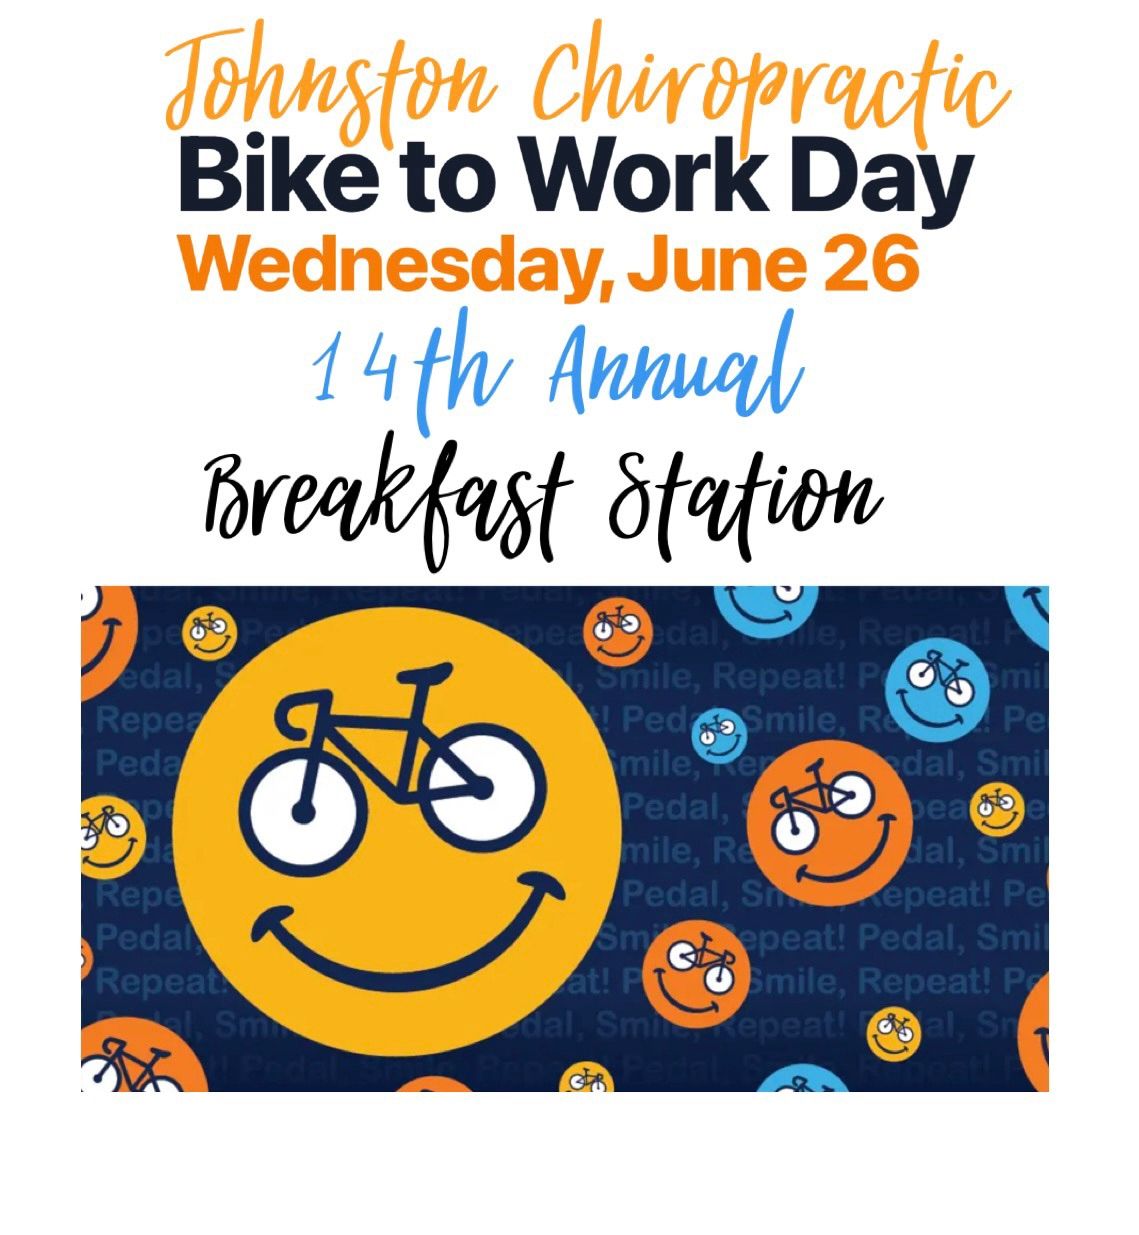 14th Annual Bike To Work Day